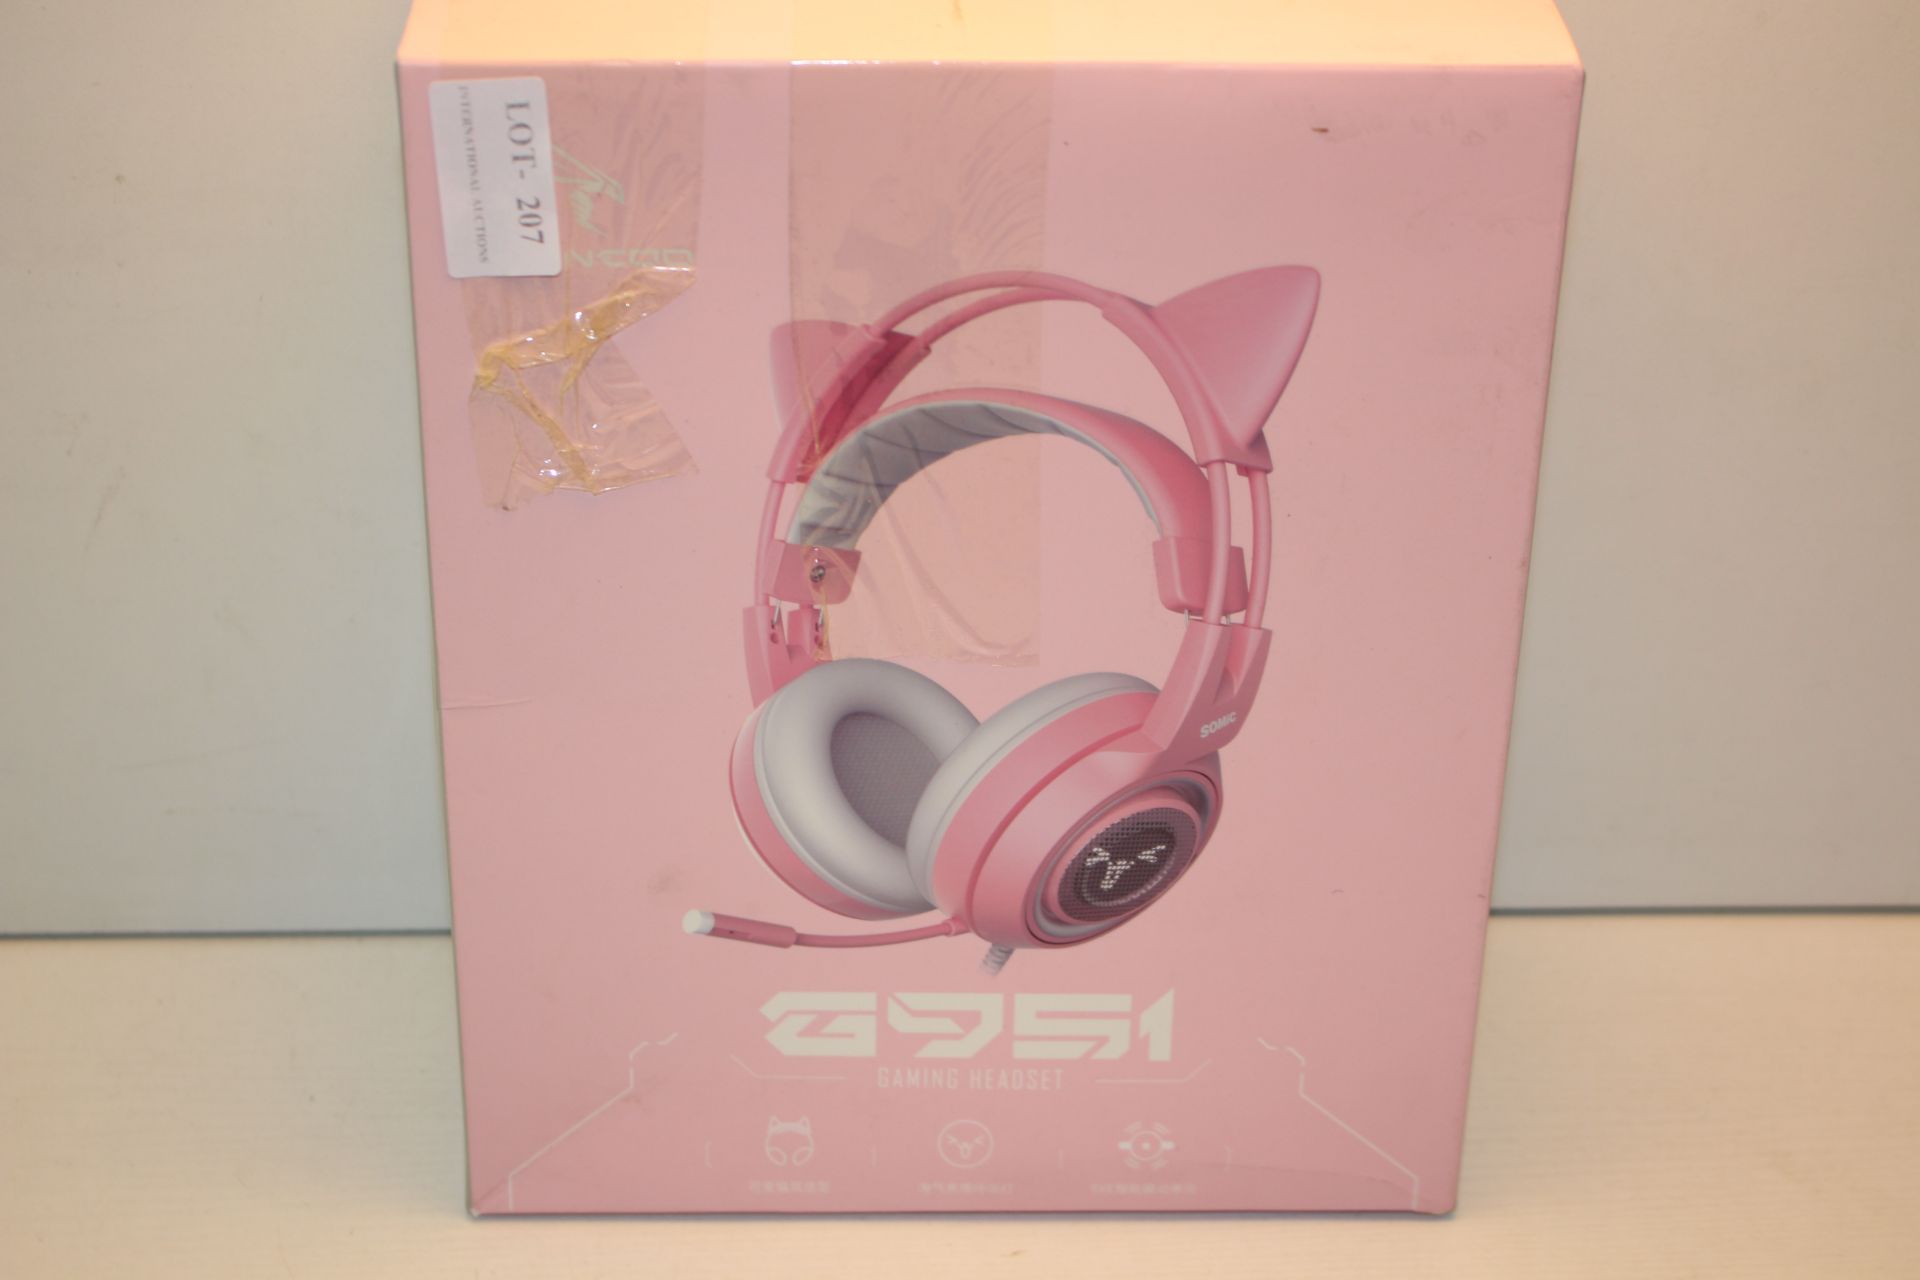 BOXED STINCOO 295i GAMING HEADSET RRP £34.95Condition ReportAppraisal Available on Request- All